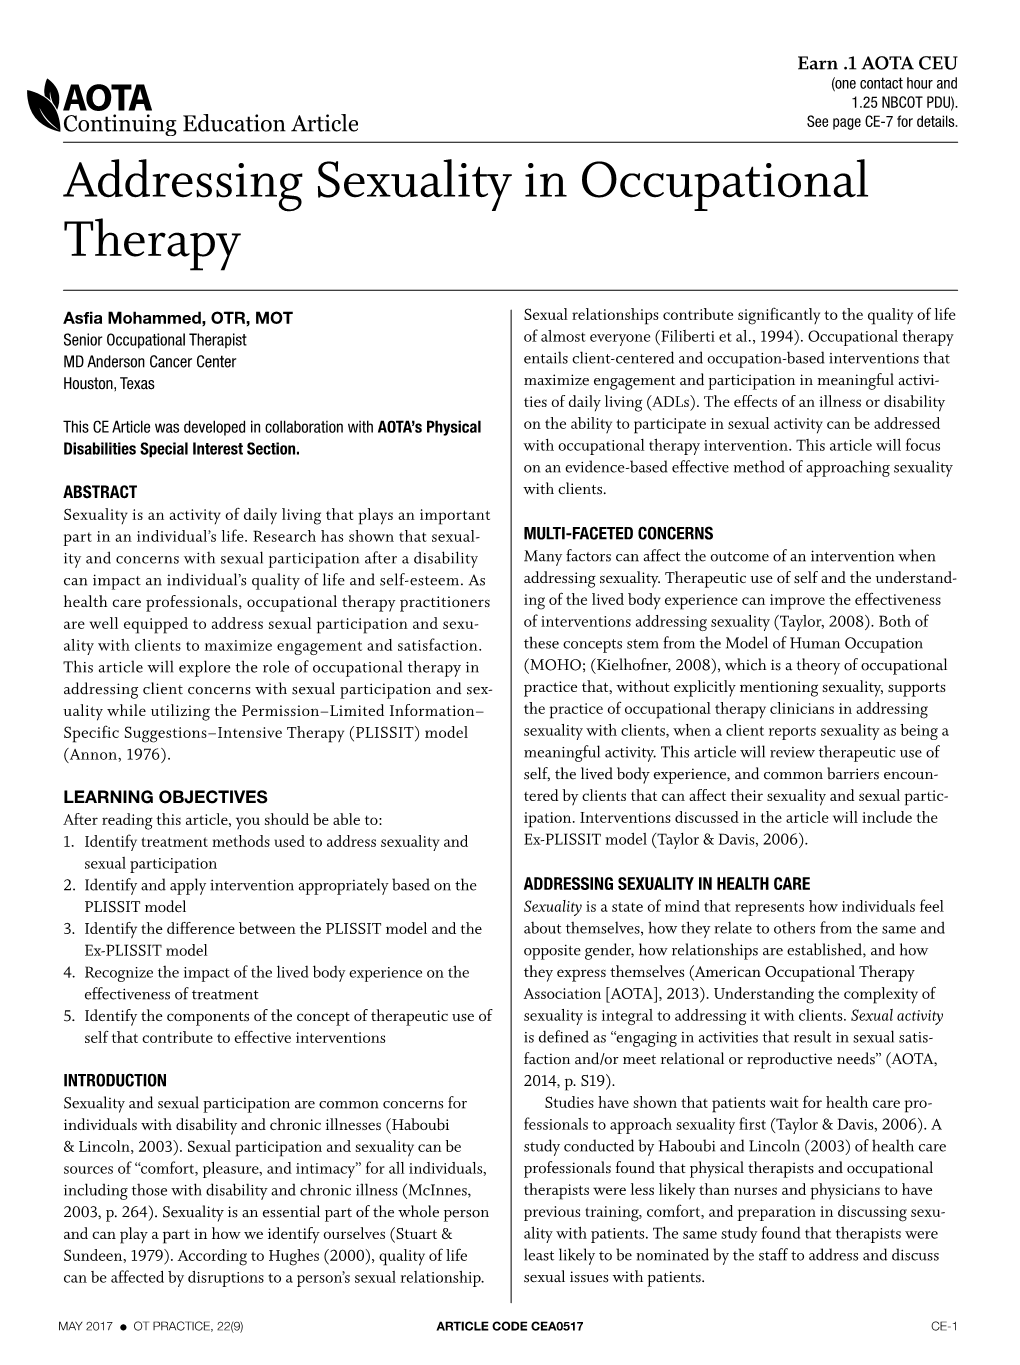 Addressing Sexuality in Occupational Therapy